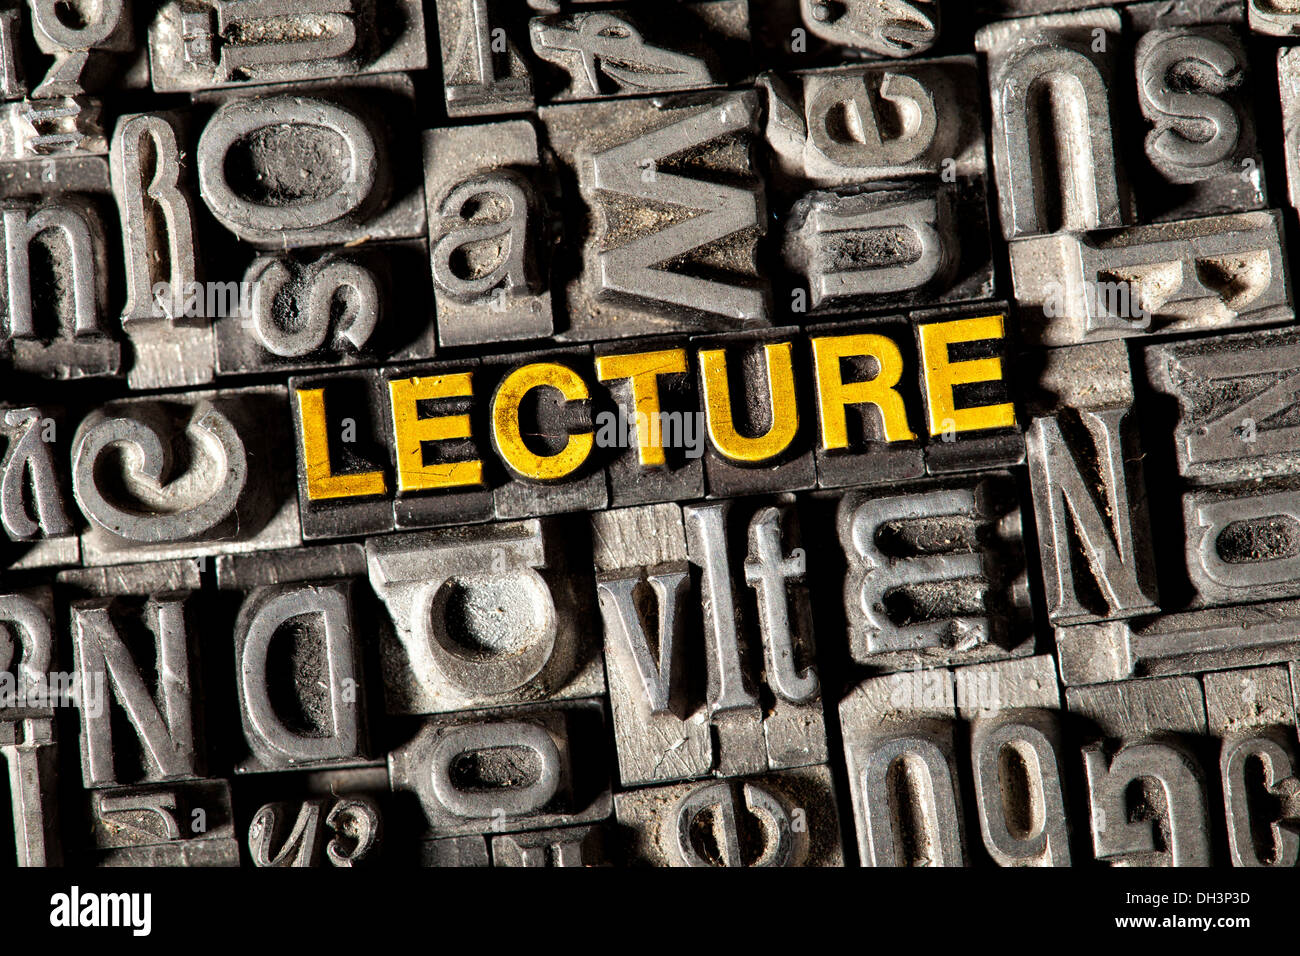 Old lead letters forming the word 'LECTURE' Stock Photo